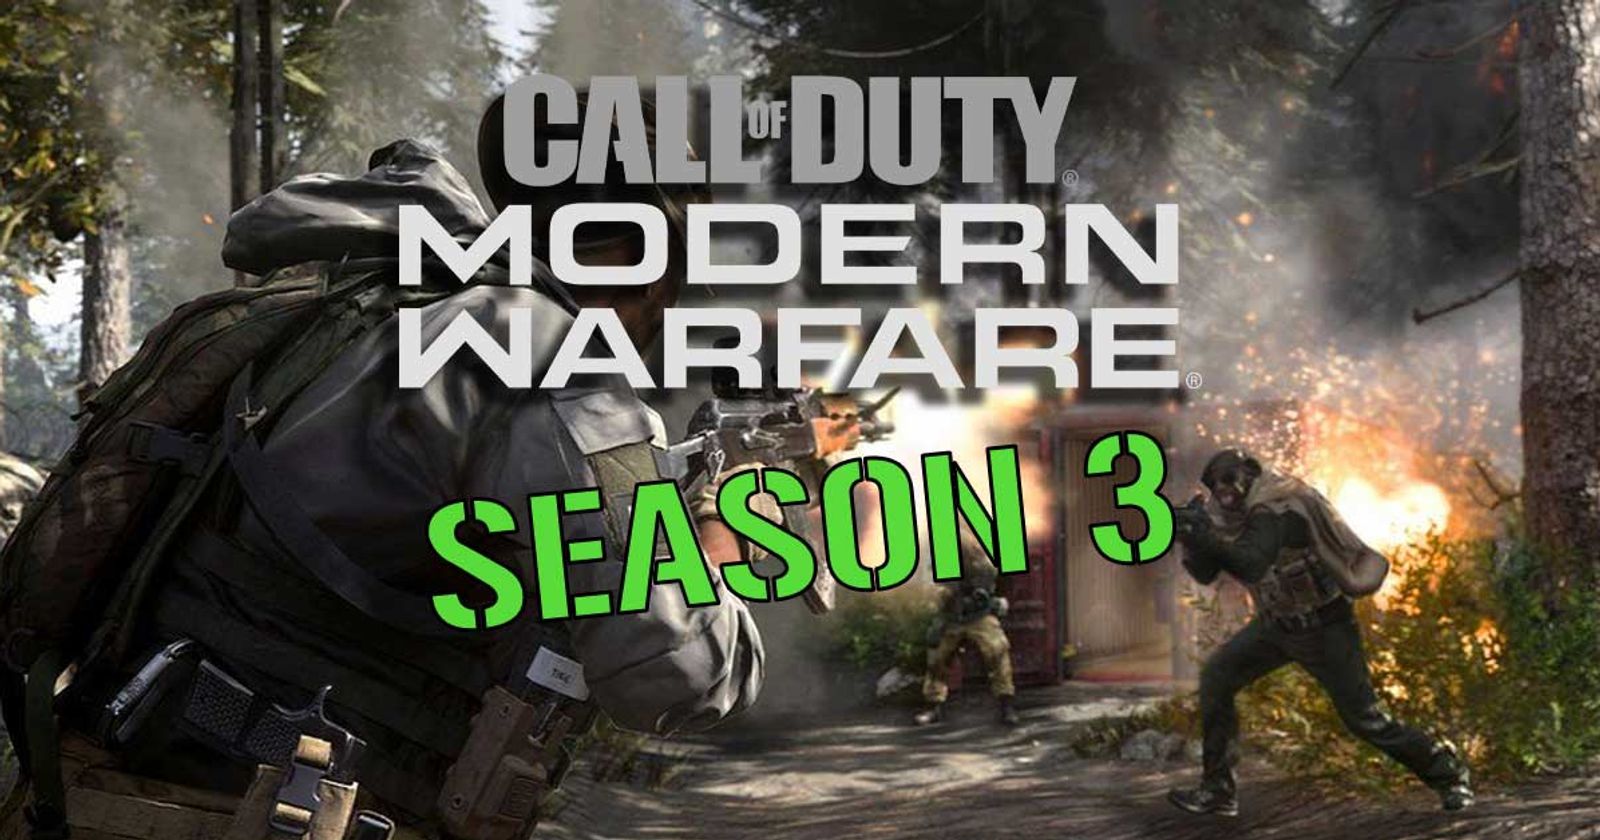 Modern Warfare 2 Remastered art has been unearthed by dataminers